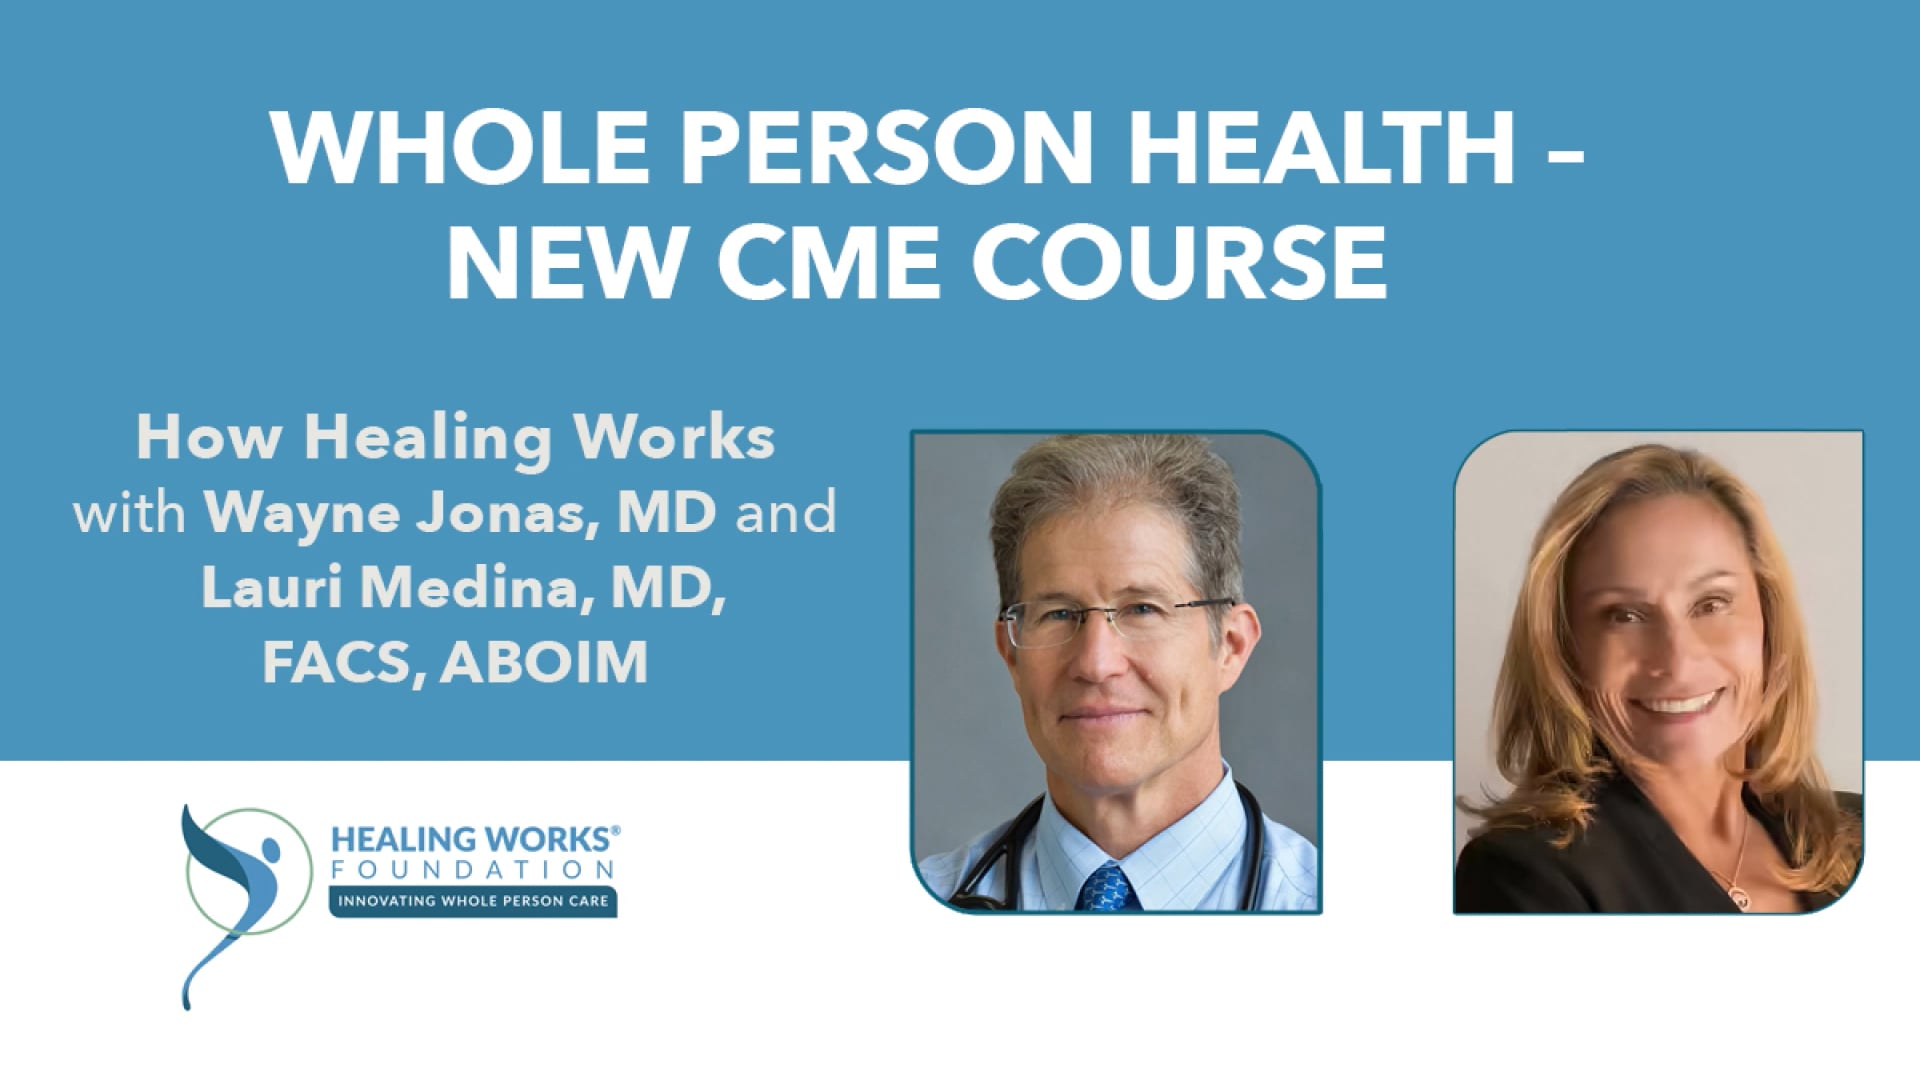 Interview with Dr. Lauri Medina (Whole Person Health – New CME Course)